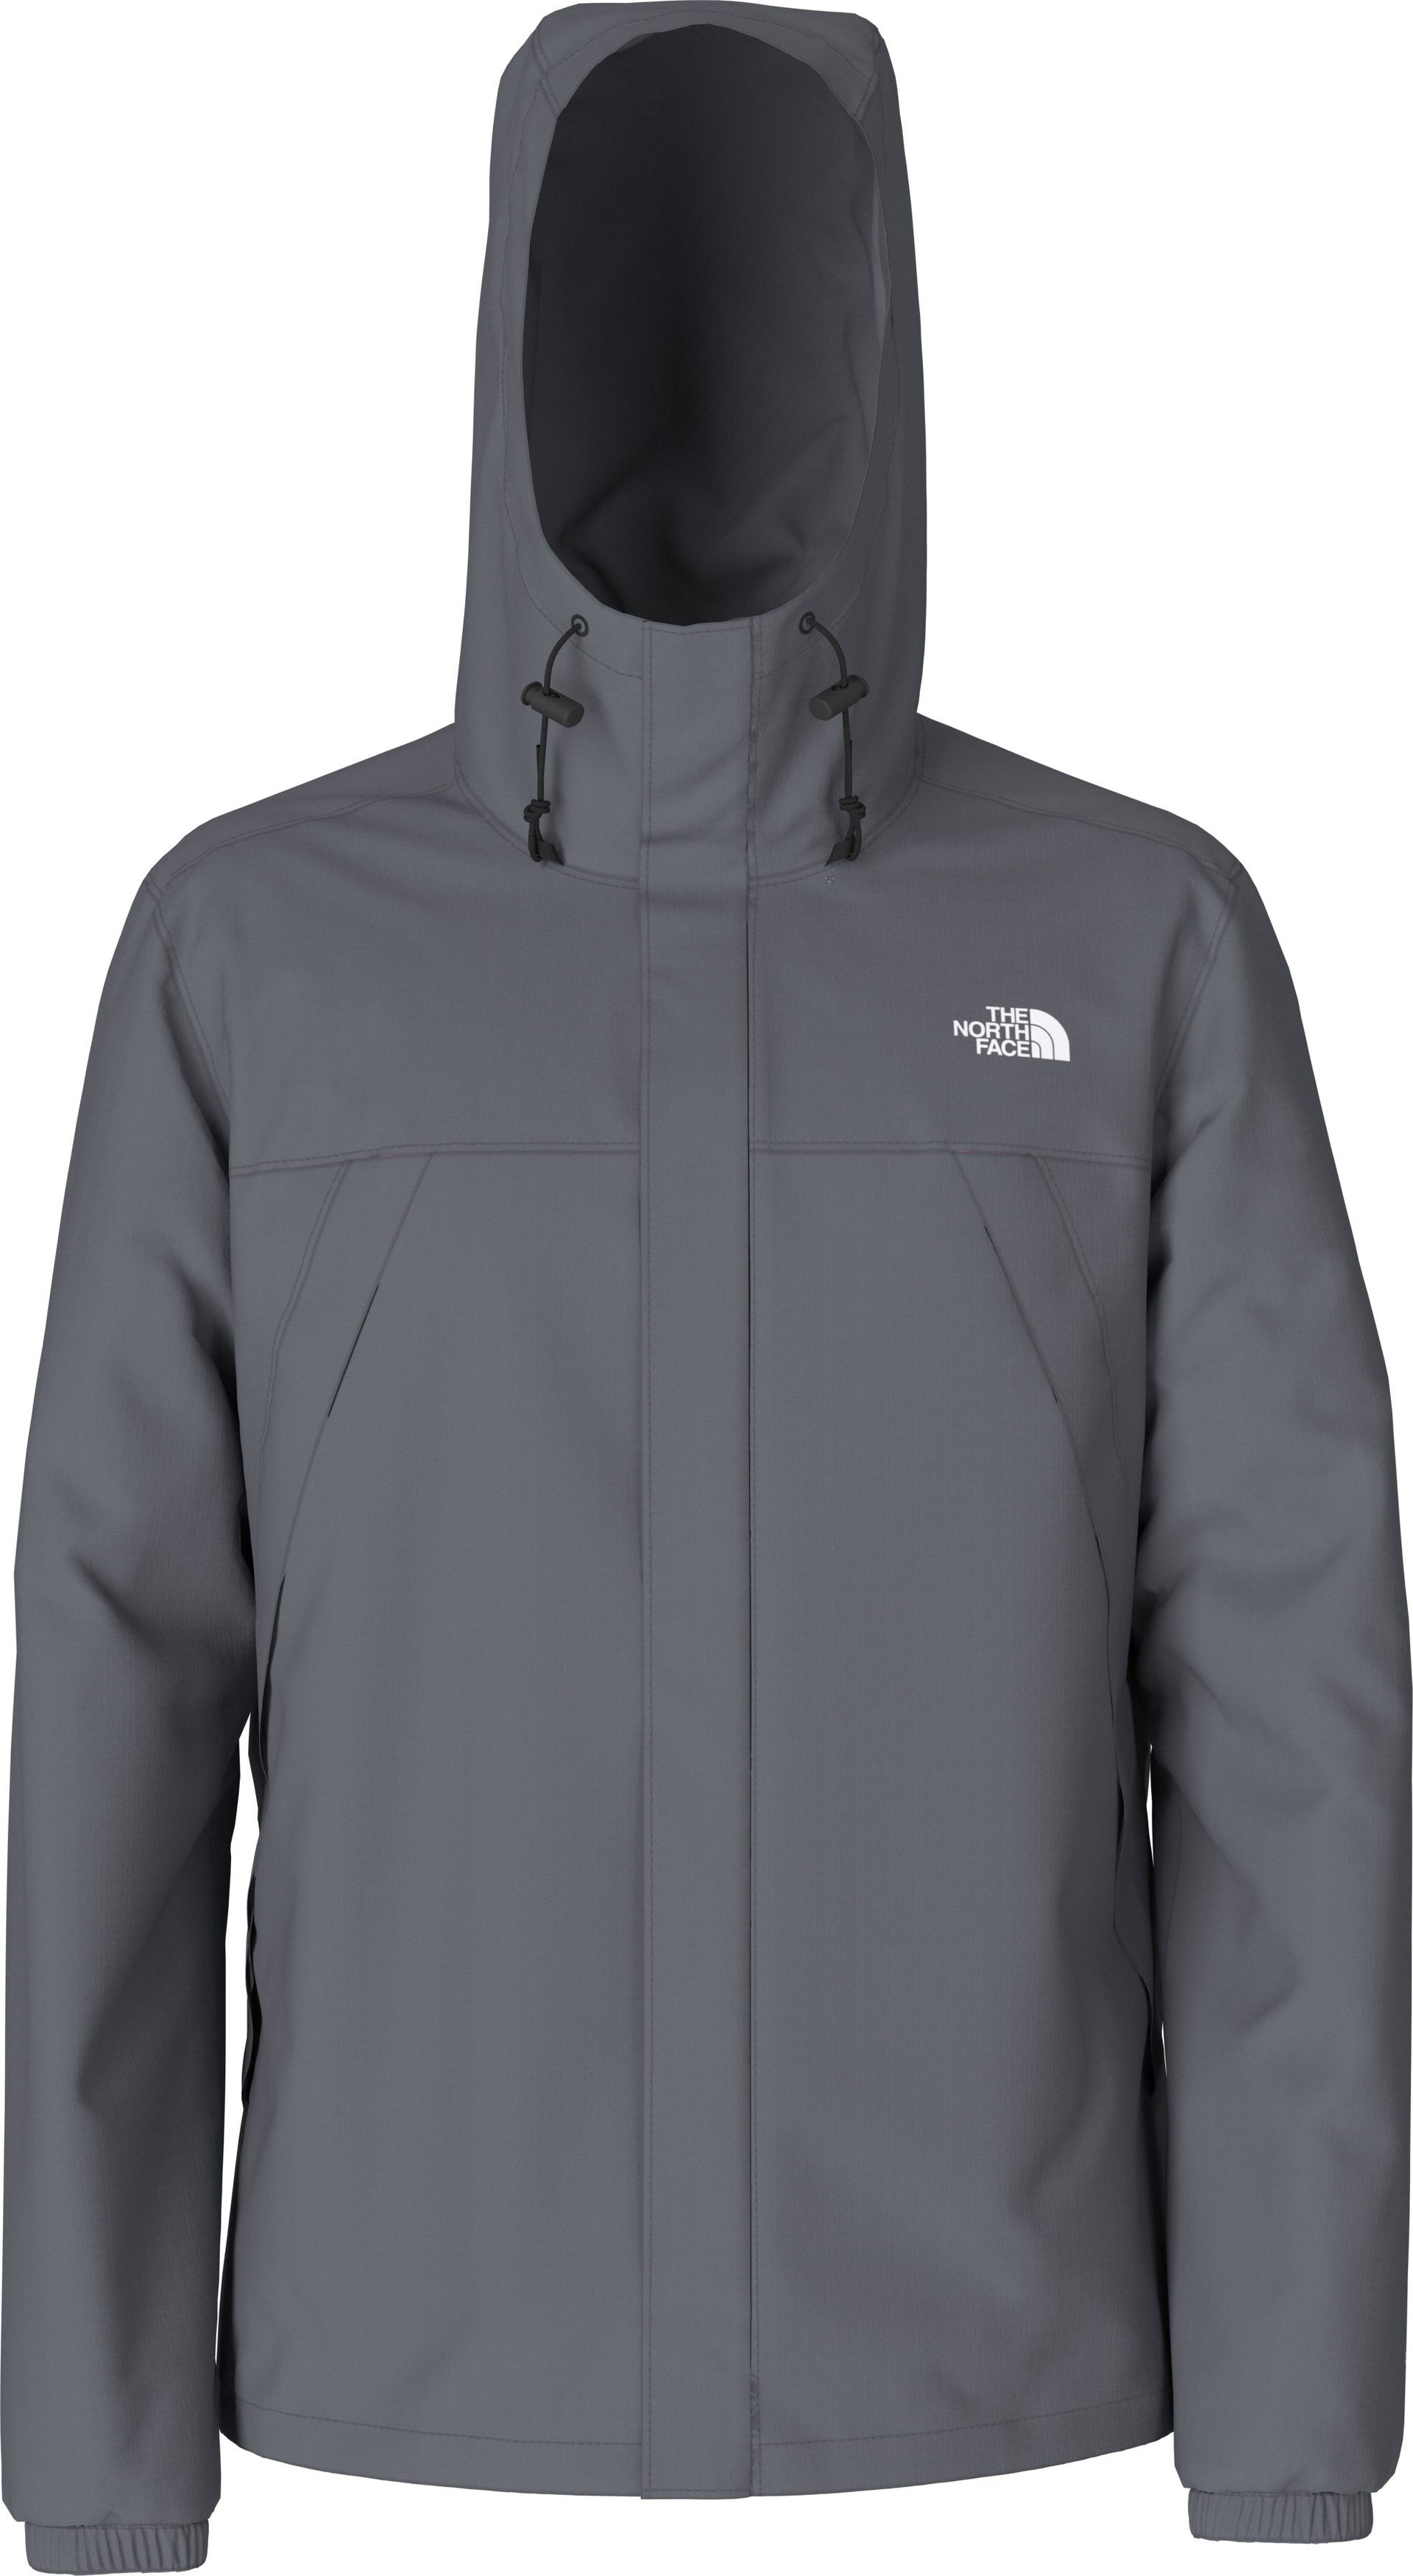  THE NORTH FACE Candescent Full Zip, TNF Medium Grey  Heather/Vanadis Grey, X-Small : Clothing, Shoes & Jewelry